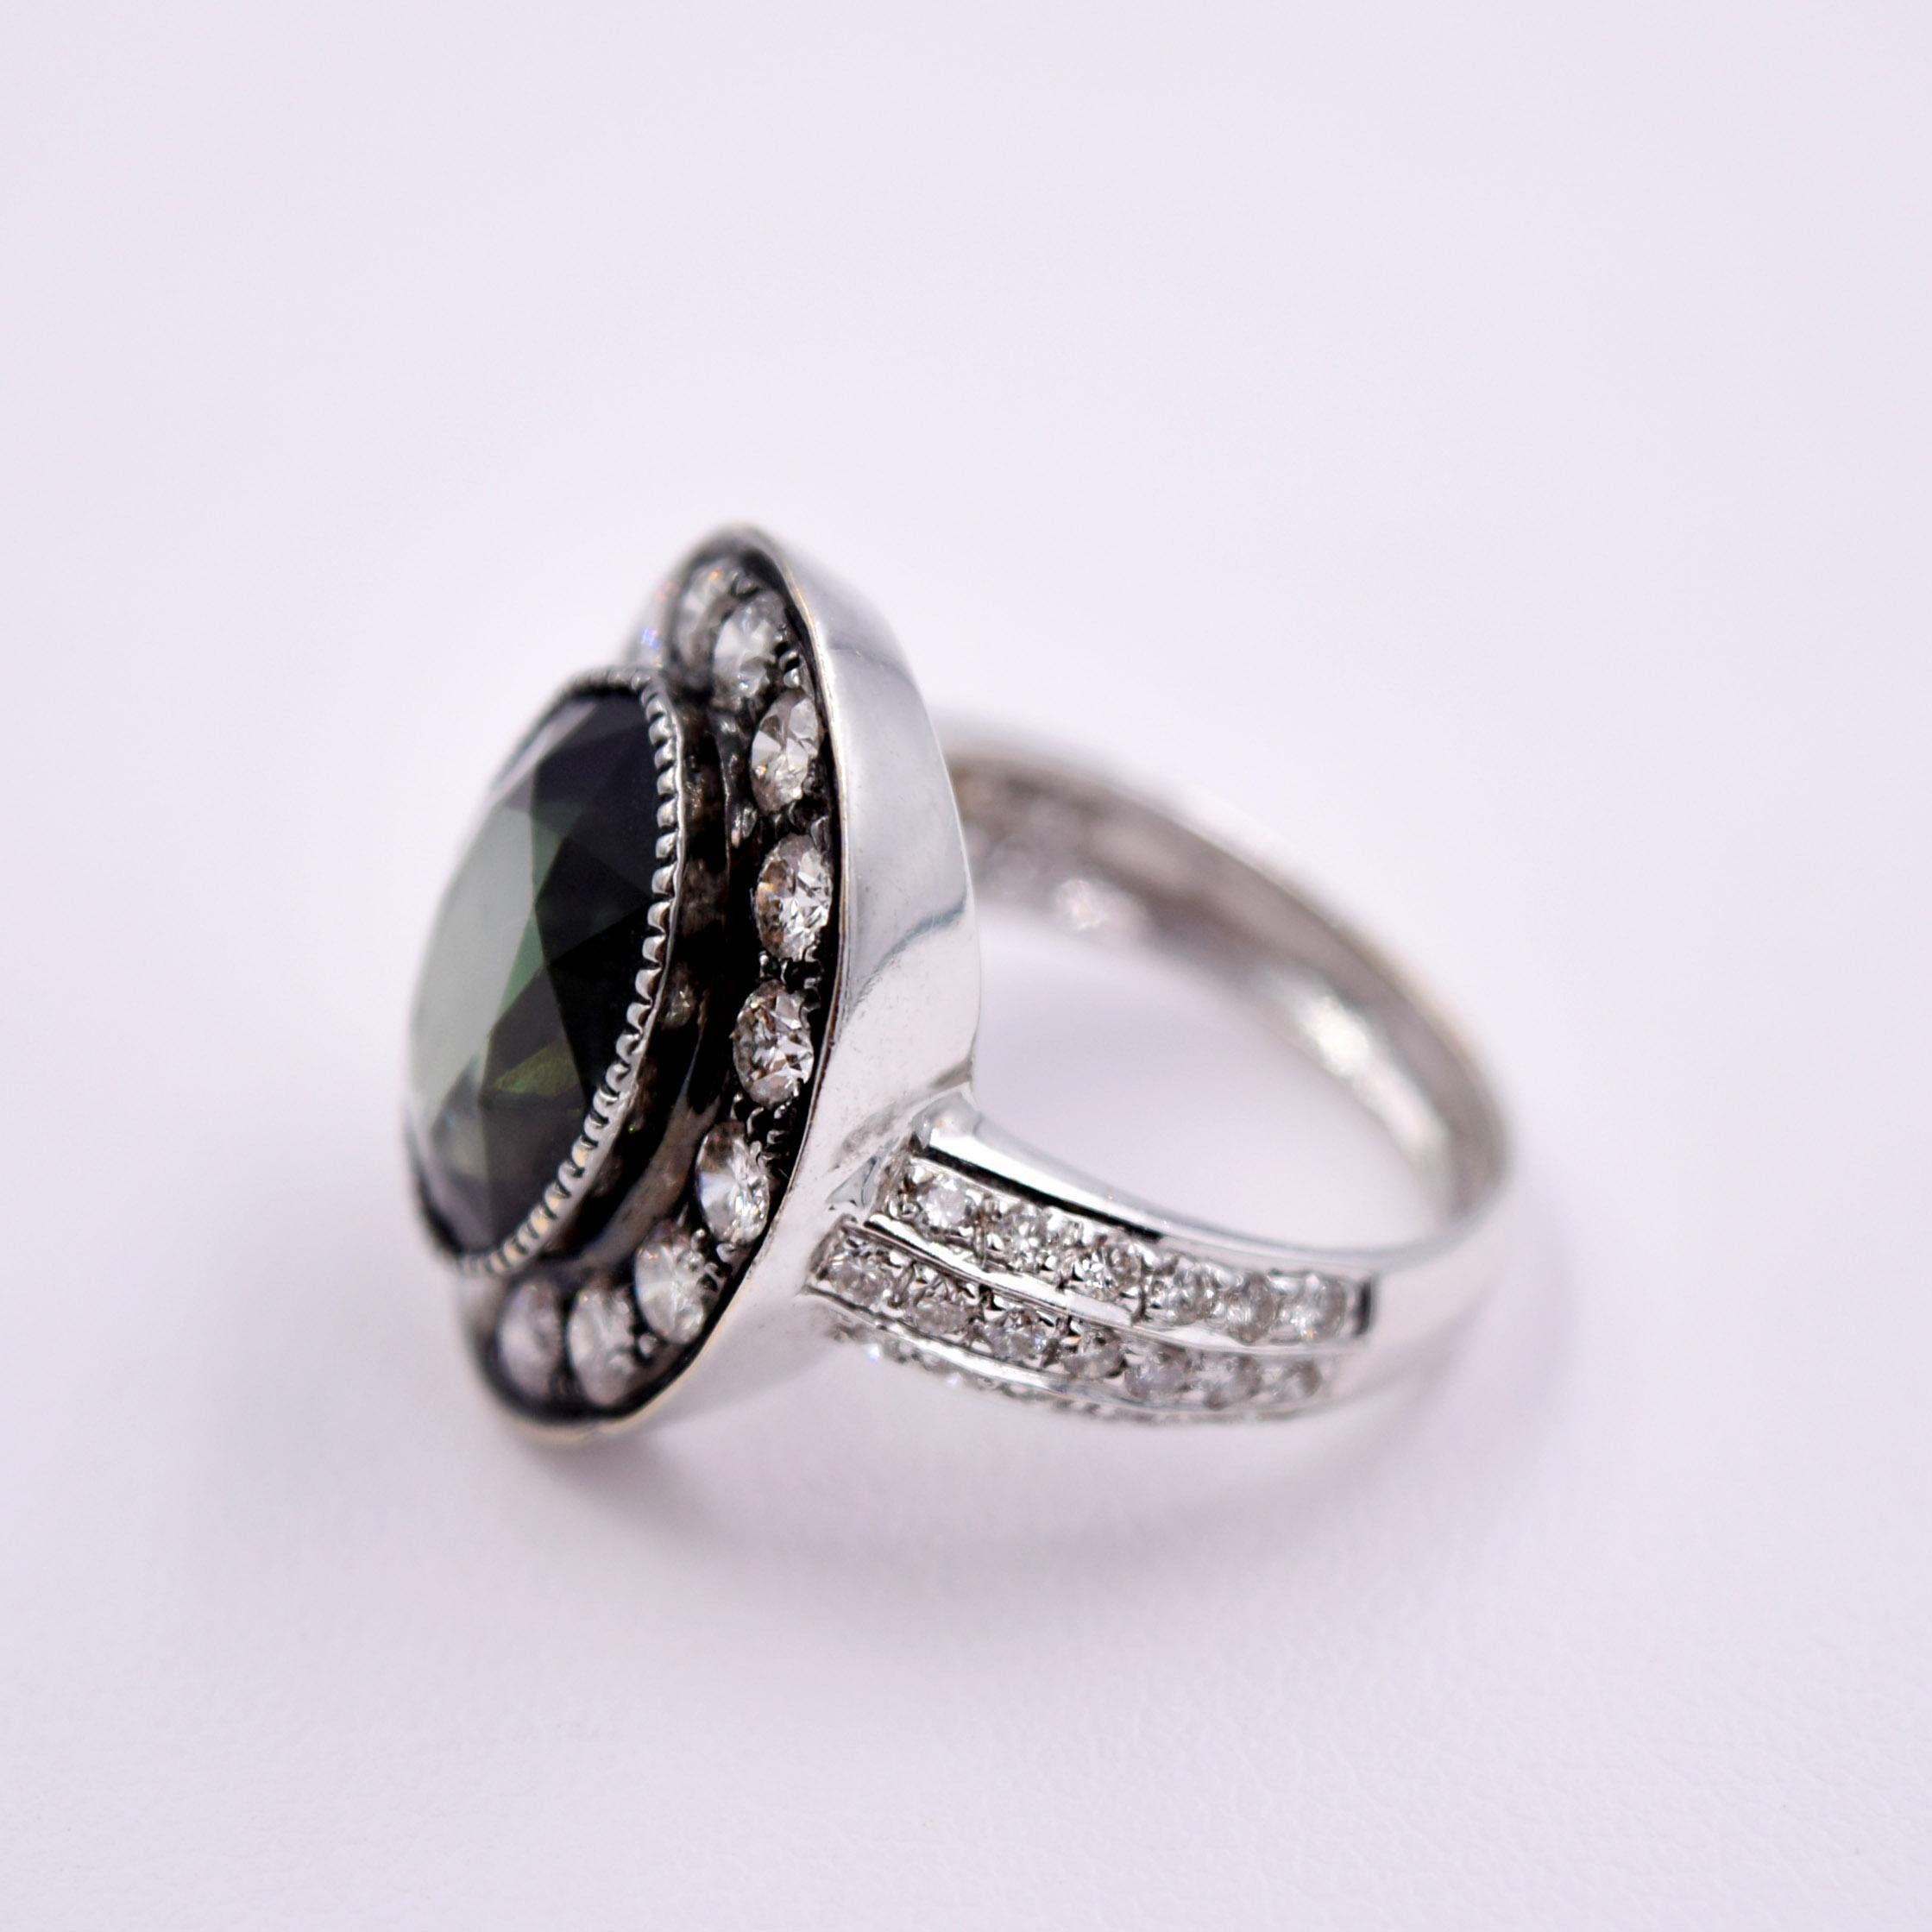 A gorgeous 5.5ct deep green oval shaped Tourmaline is featured in this vintage inspired design by Sethi Couture. 16 Brilliant White Diamonds surround the Green Tourmaline, bringing this beautiful Cocktail Ring to life. Three rows of smaller White